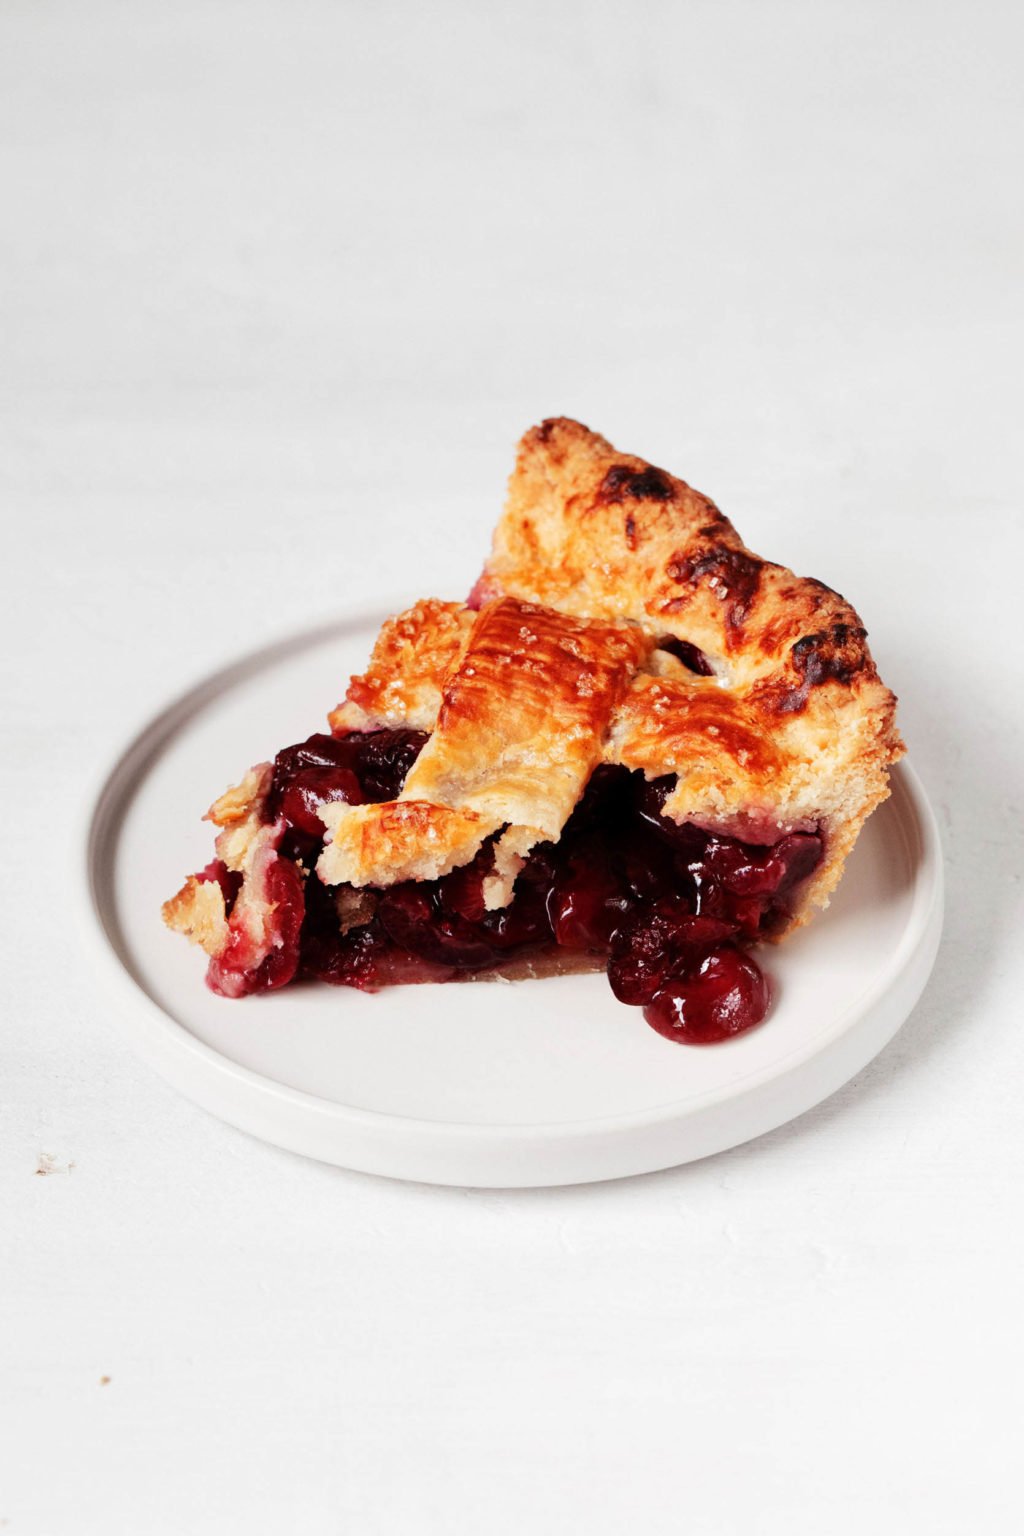 A slice of cherry pie rests on a small, white dessert plate. It's filled with juicy cherries and has a lattice top crust.